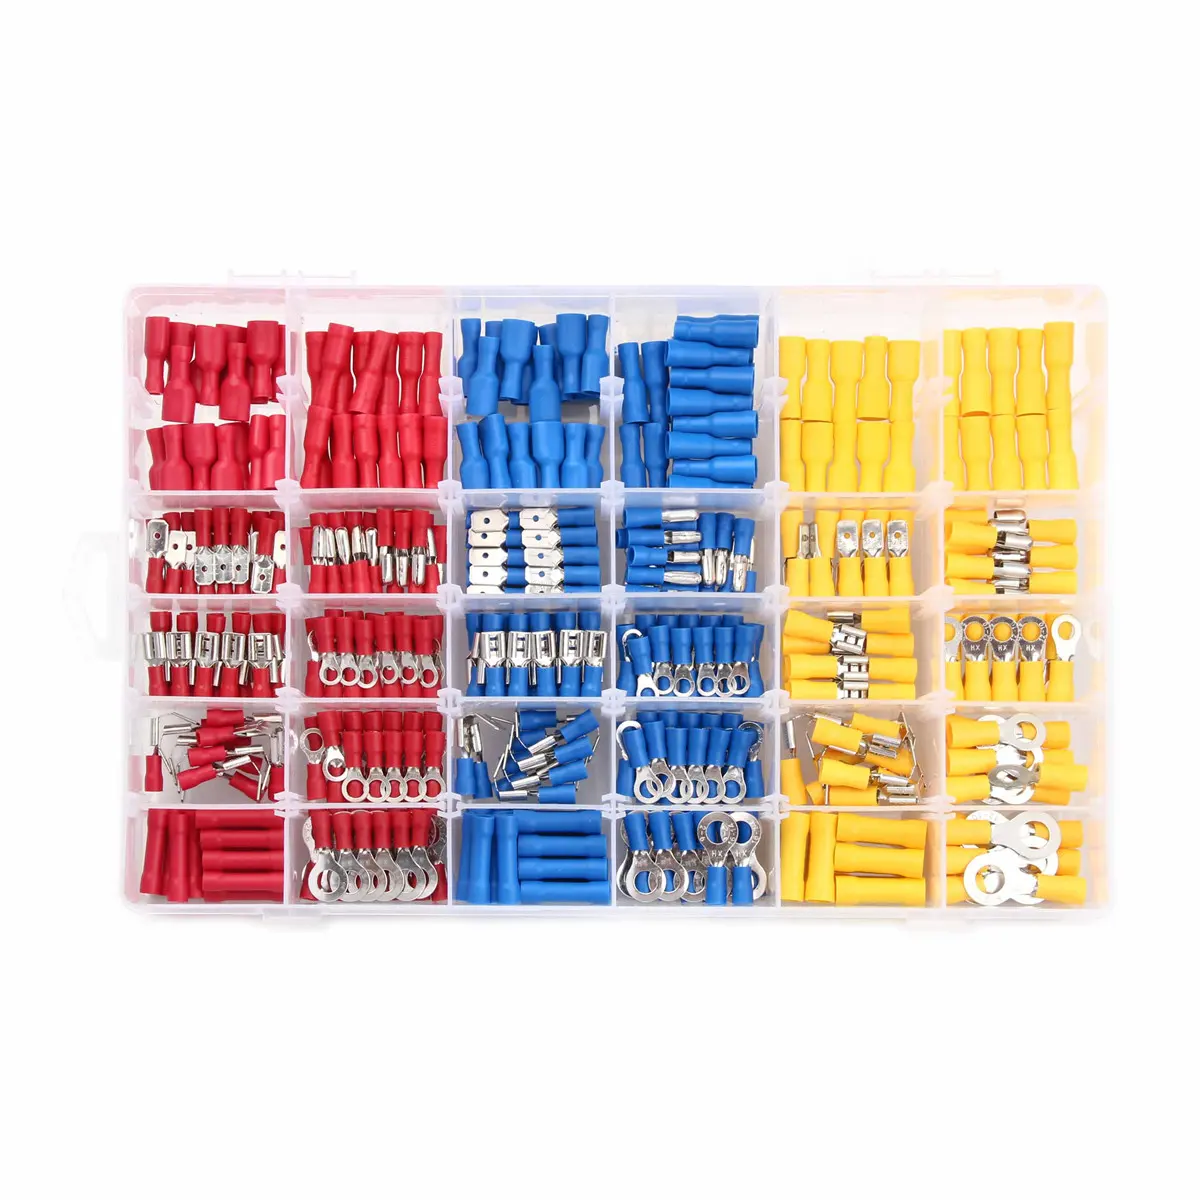 480PCS Insulated Wire Electrical Connectors - Butt, Ring, Spade, Quick Disconnect - Crimp Terminals Connectors Assortment Kit